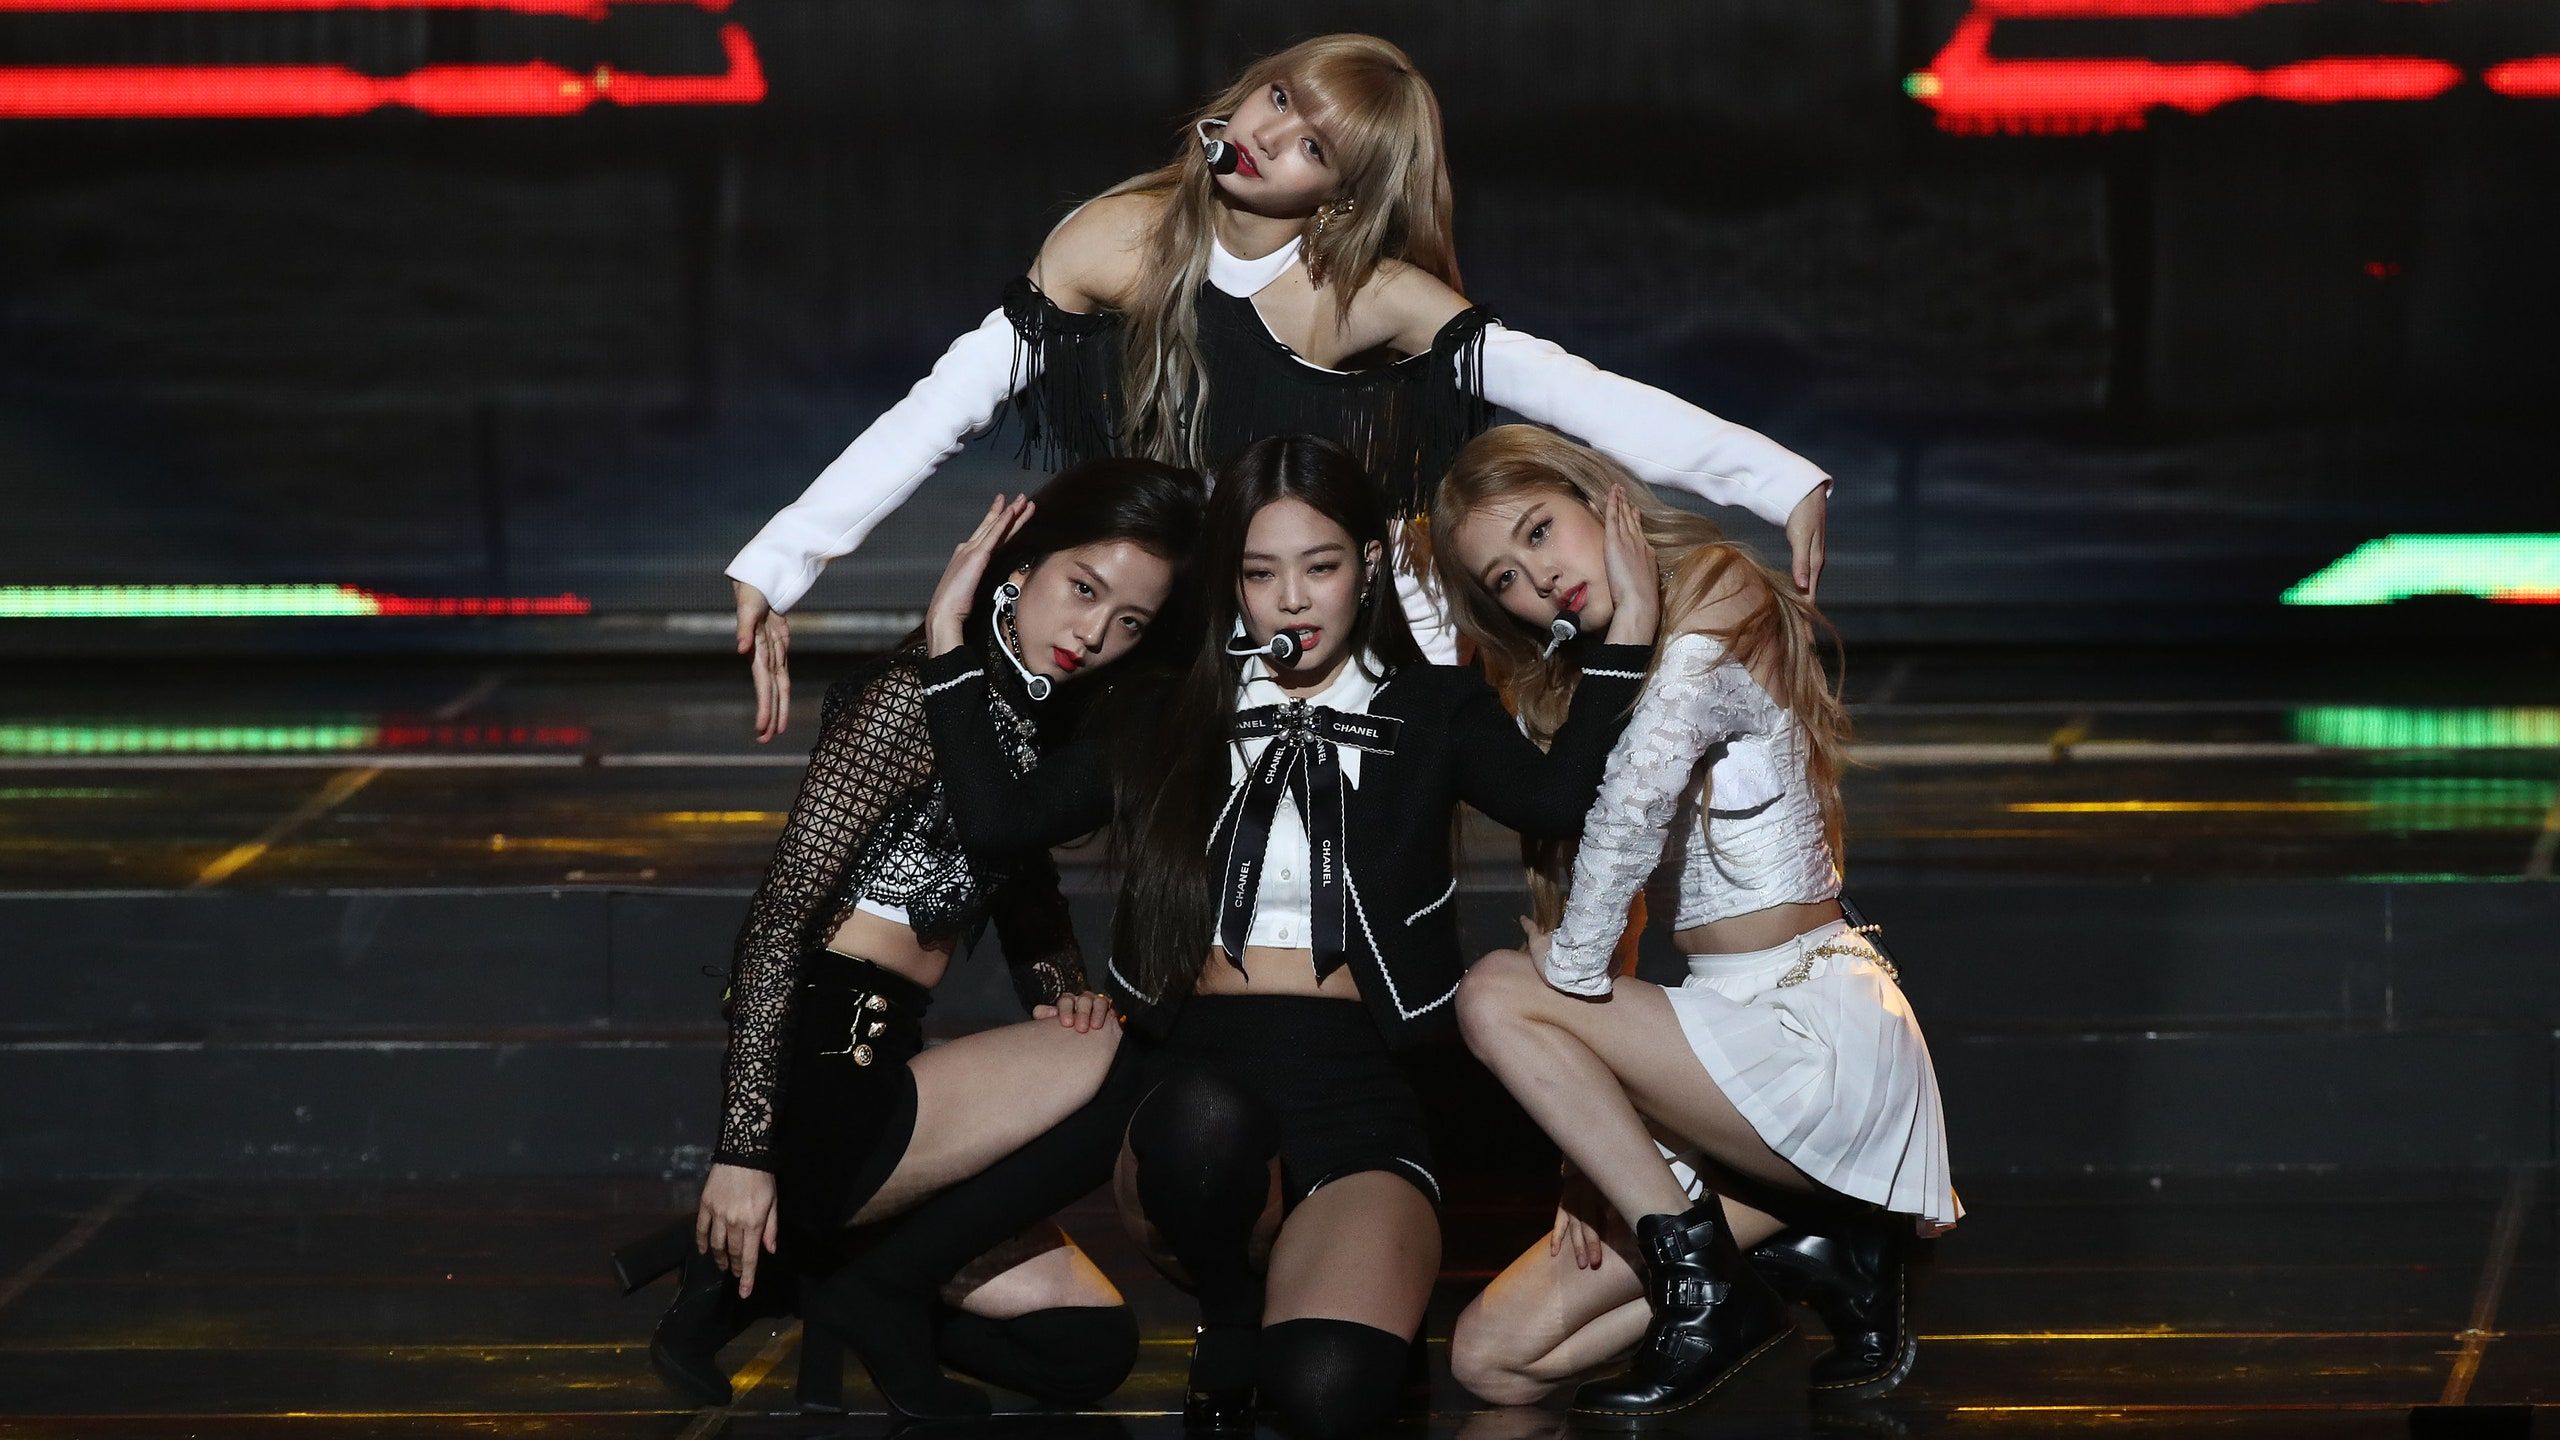 BLACKPINK Drops How You Like That Music Video, Breaks YouTube